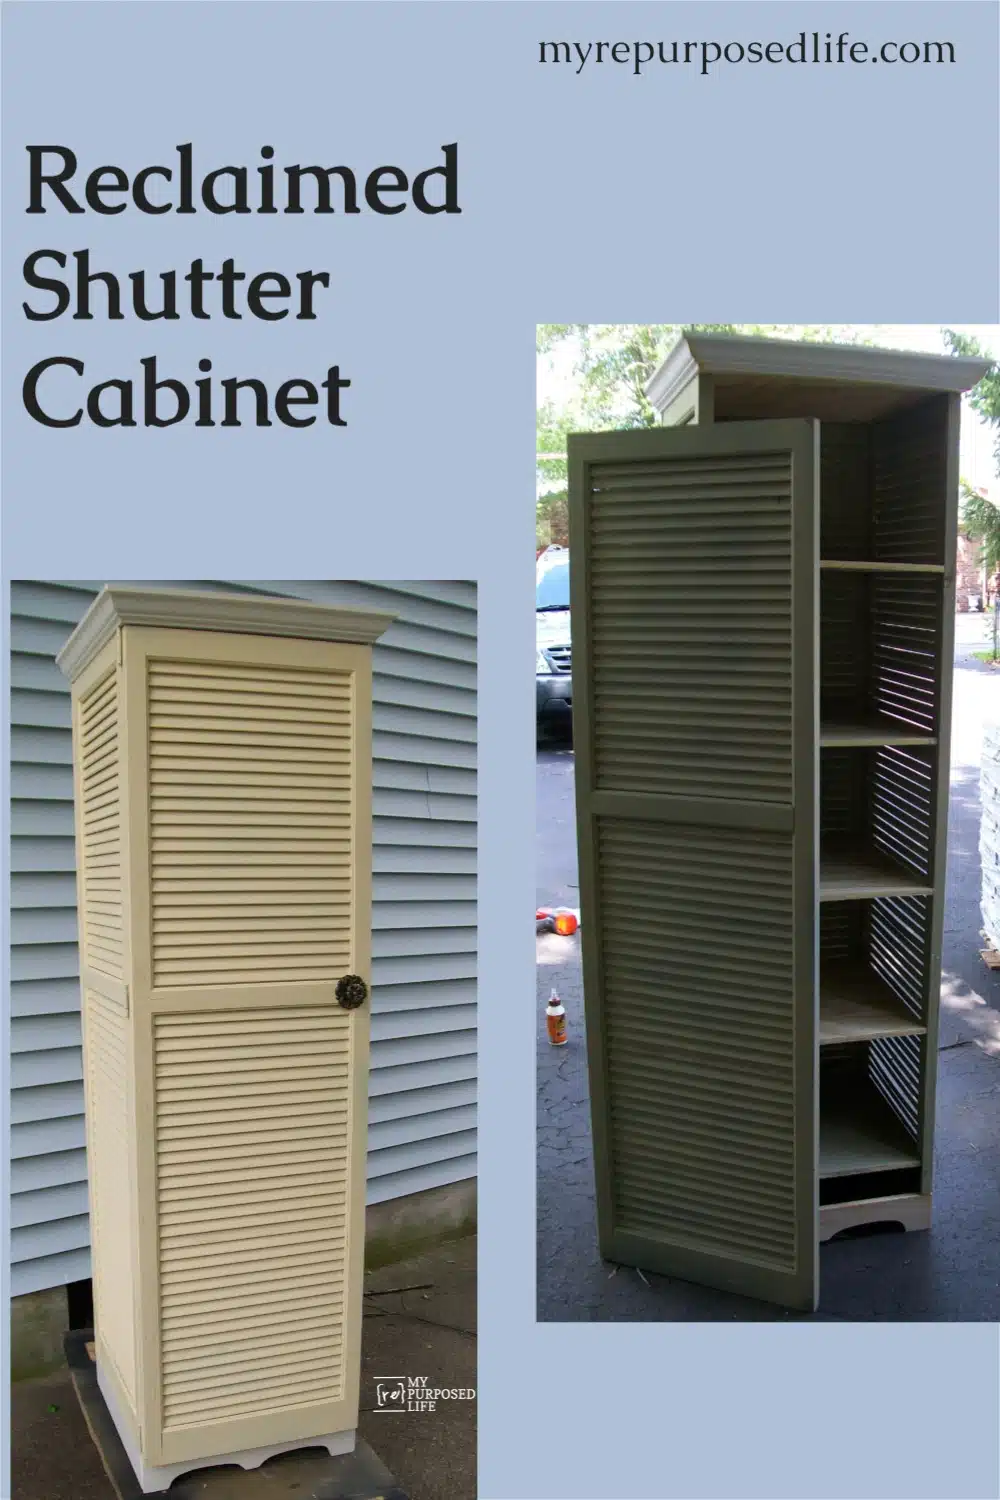 How to make a shutter cupboard out of repurposed shutters. Step by step directions will have you finished with this project in one weekend. Do It Yourself! #MyRepurposedLife #repurposed #upcycled #shutter #cupboard #diy #project via @repurposedlife